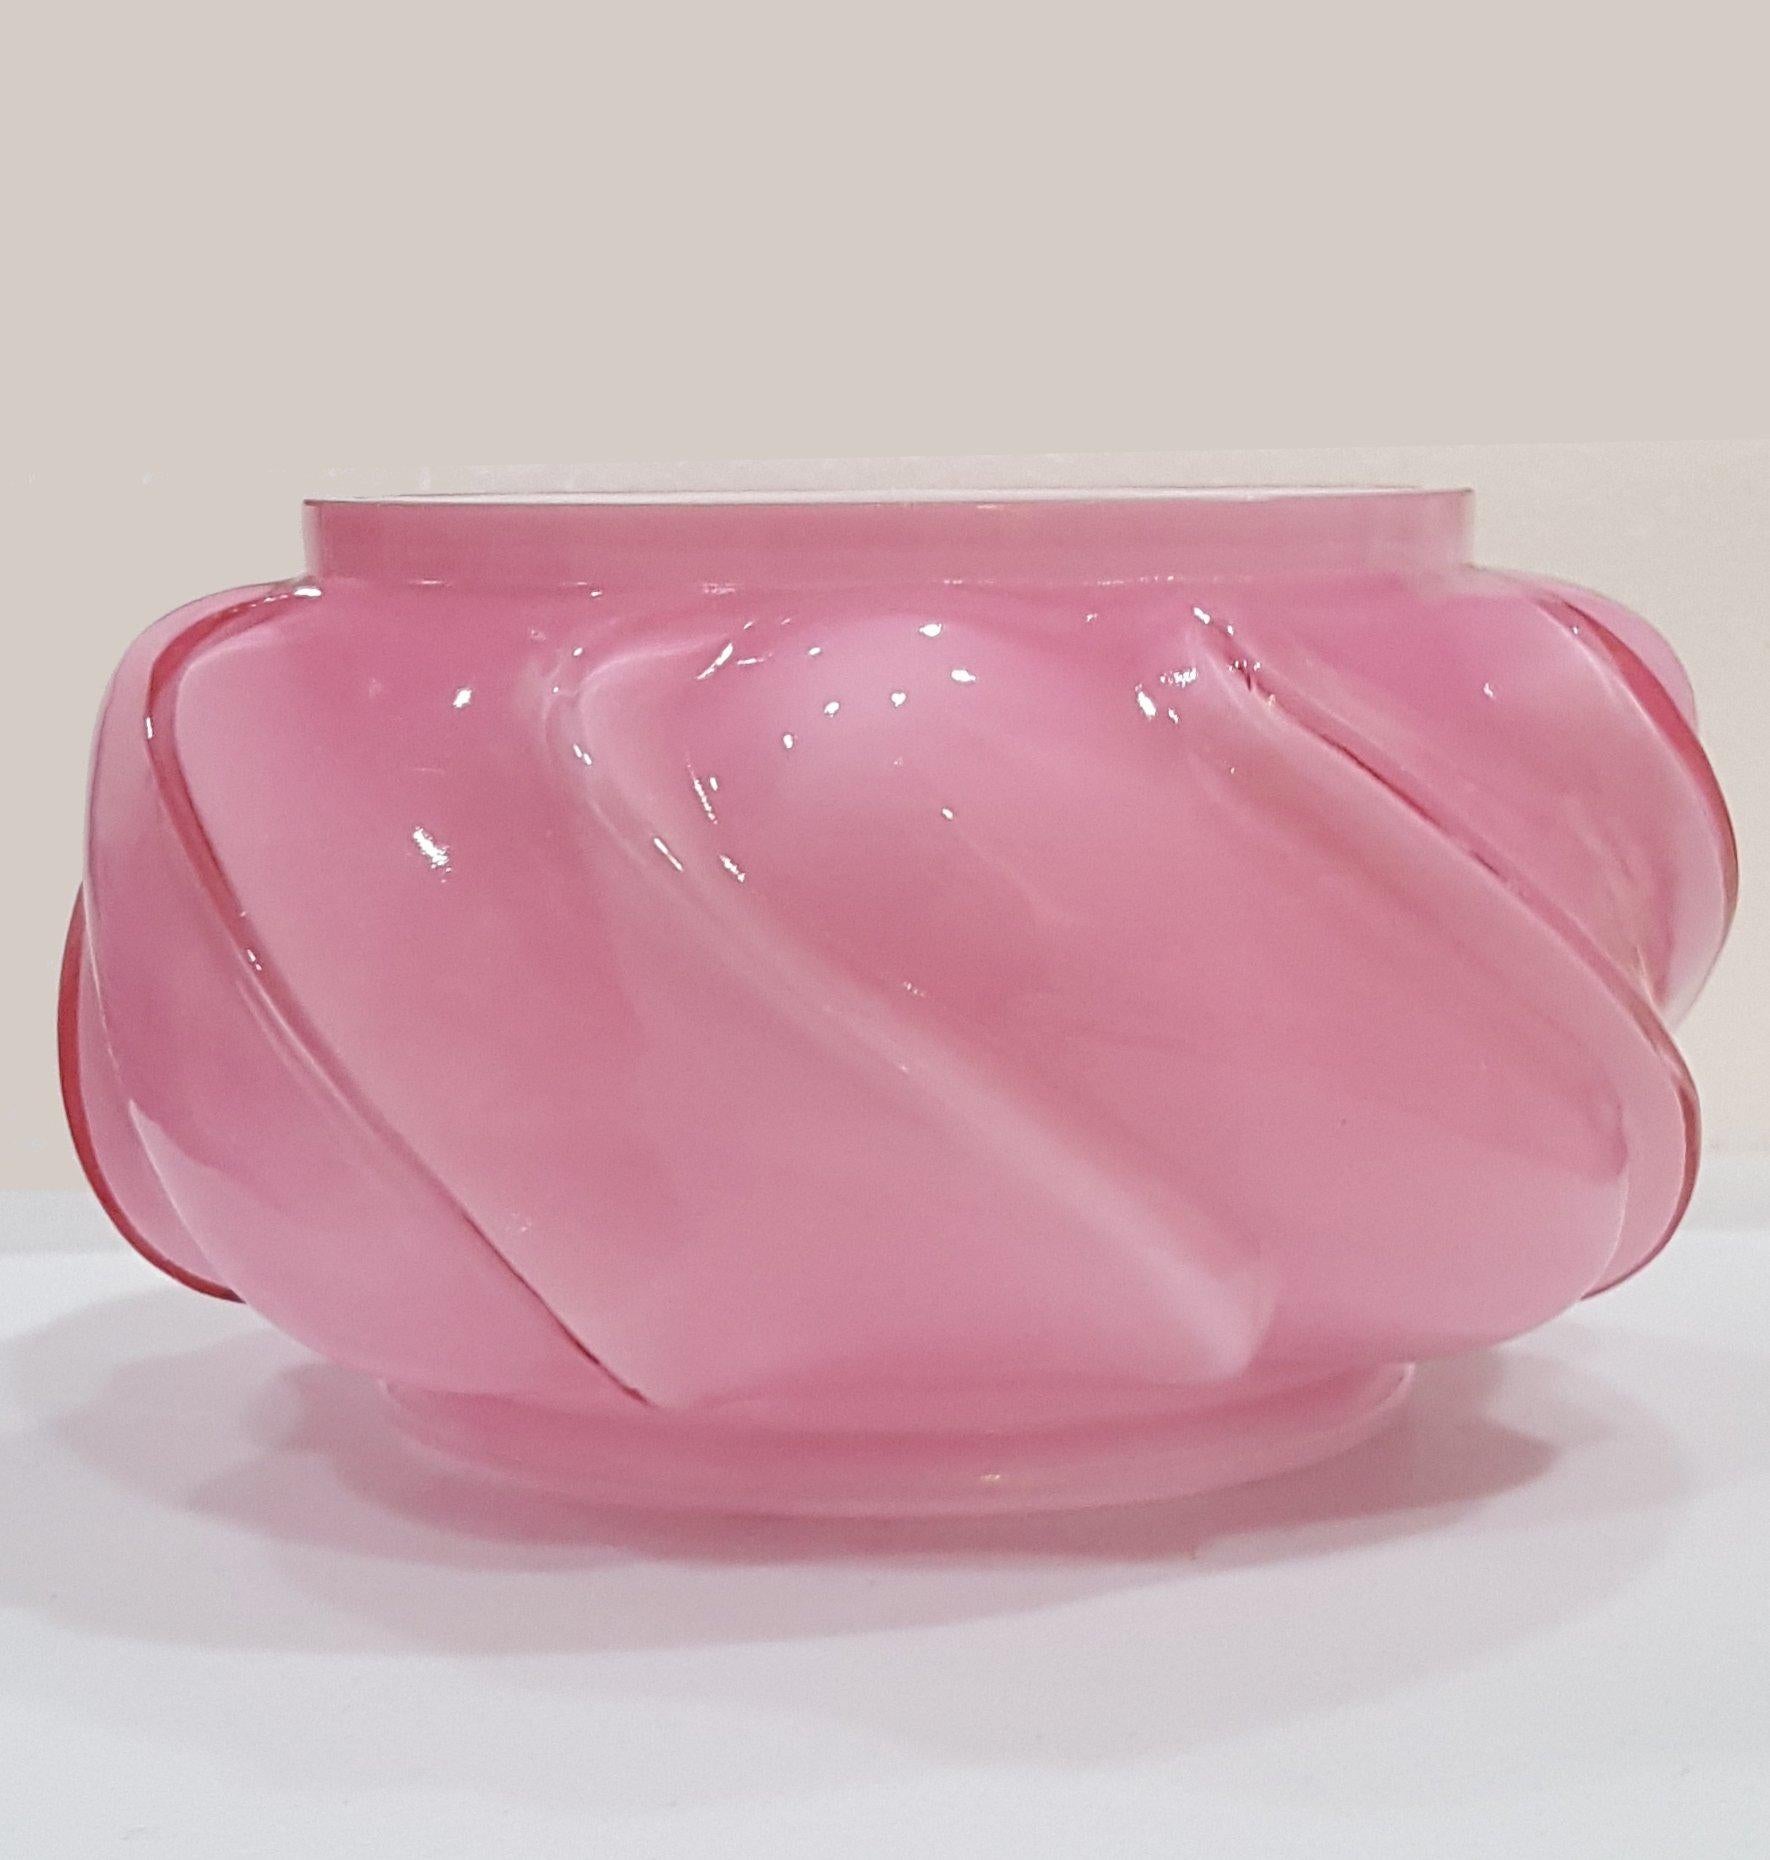 Fenton cased glass bowl, beautiful pink exterior, white interior In Good Condition For Sale In Warrenton, OR